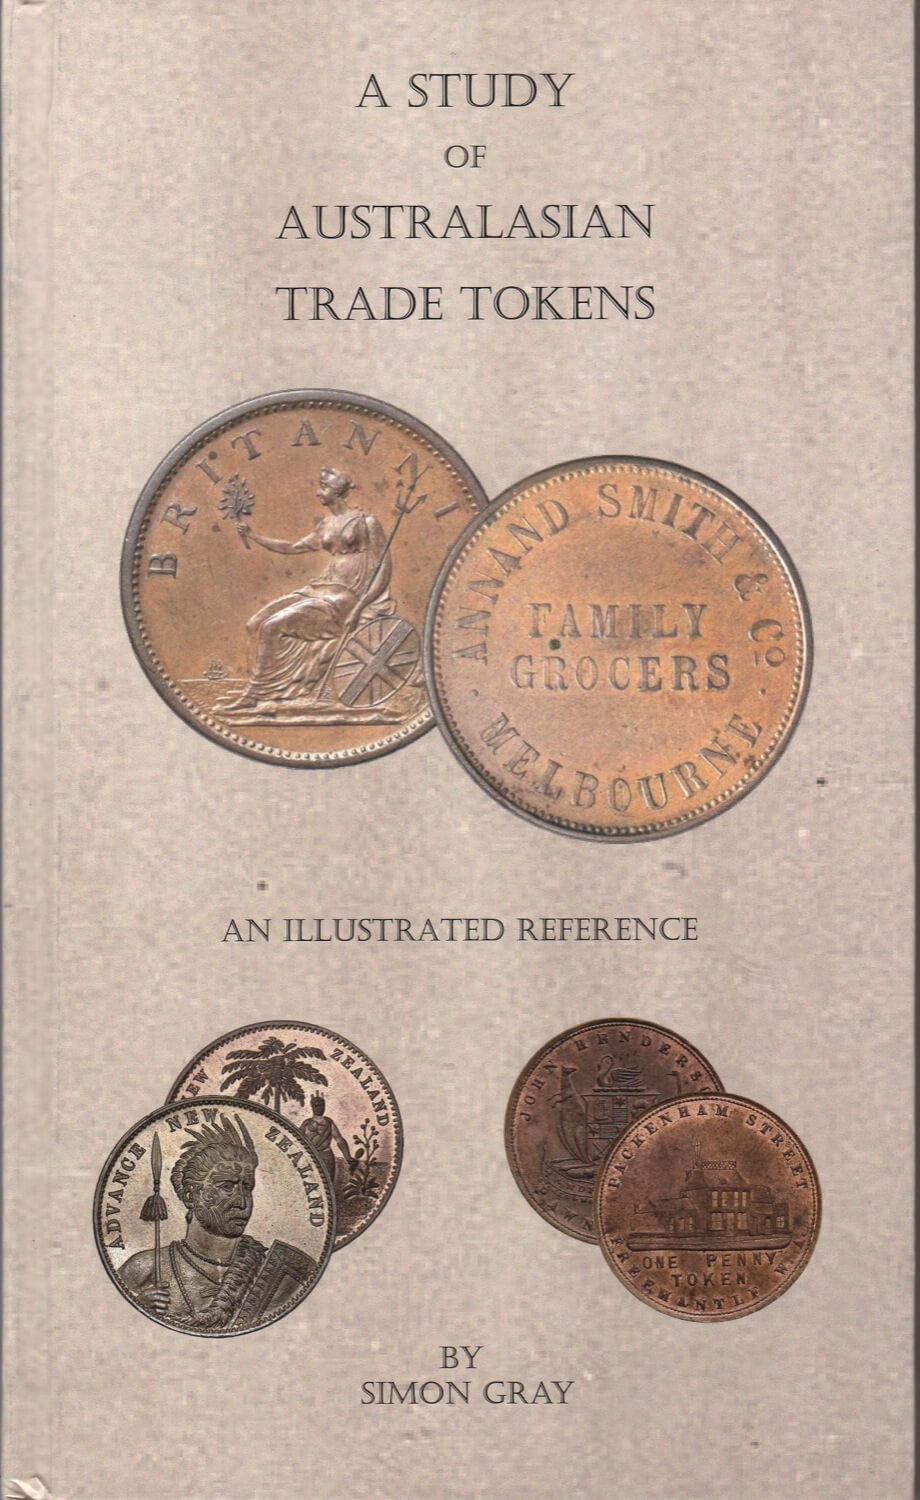 A Study of Australasian Trade Tokens Book By Simon Gray product image